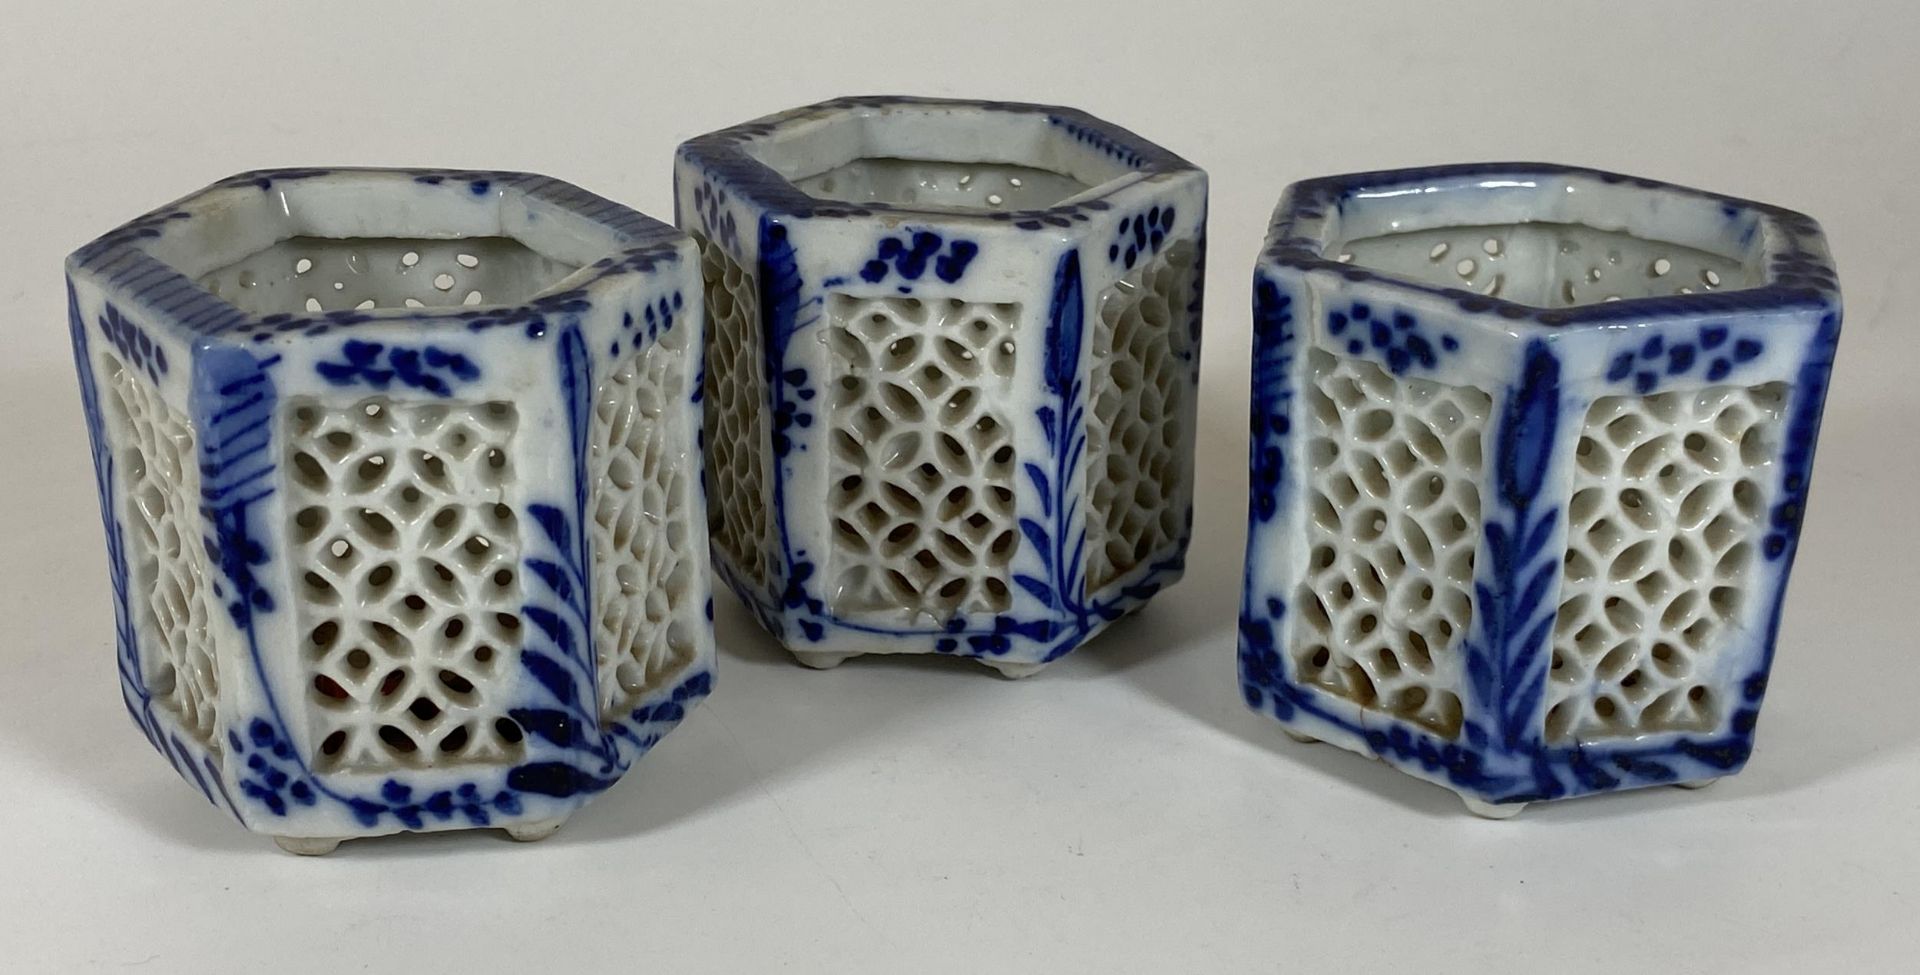 THREE CHINESE BLUE AND WHITE PORCELAIN RETICULATED CRICKET CAGES, HEIGHT 7CM